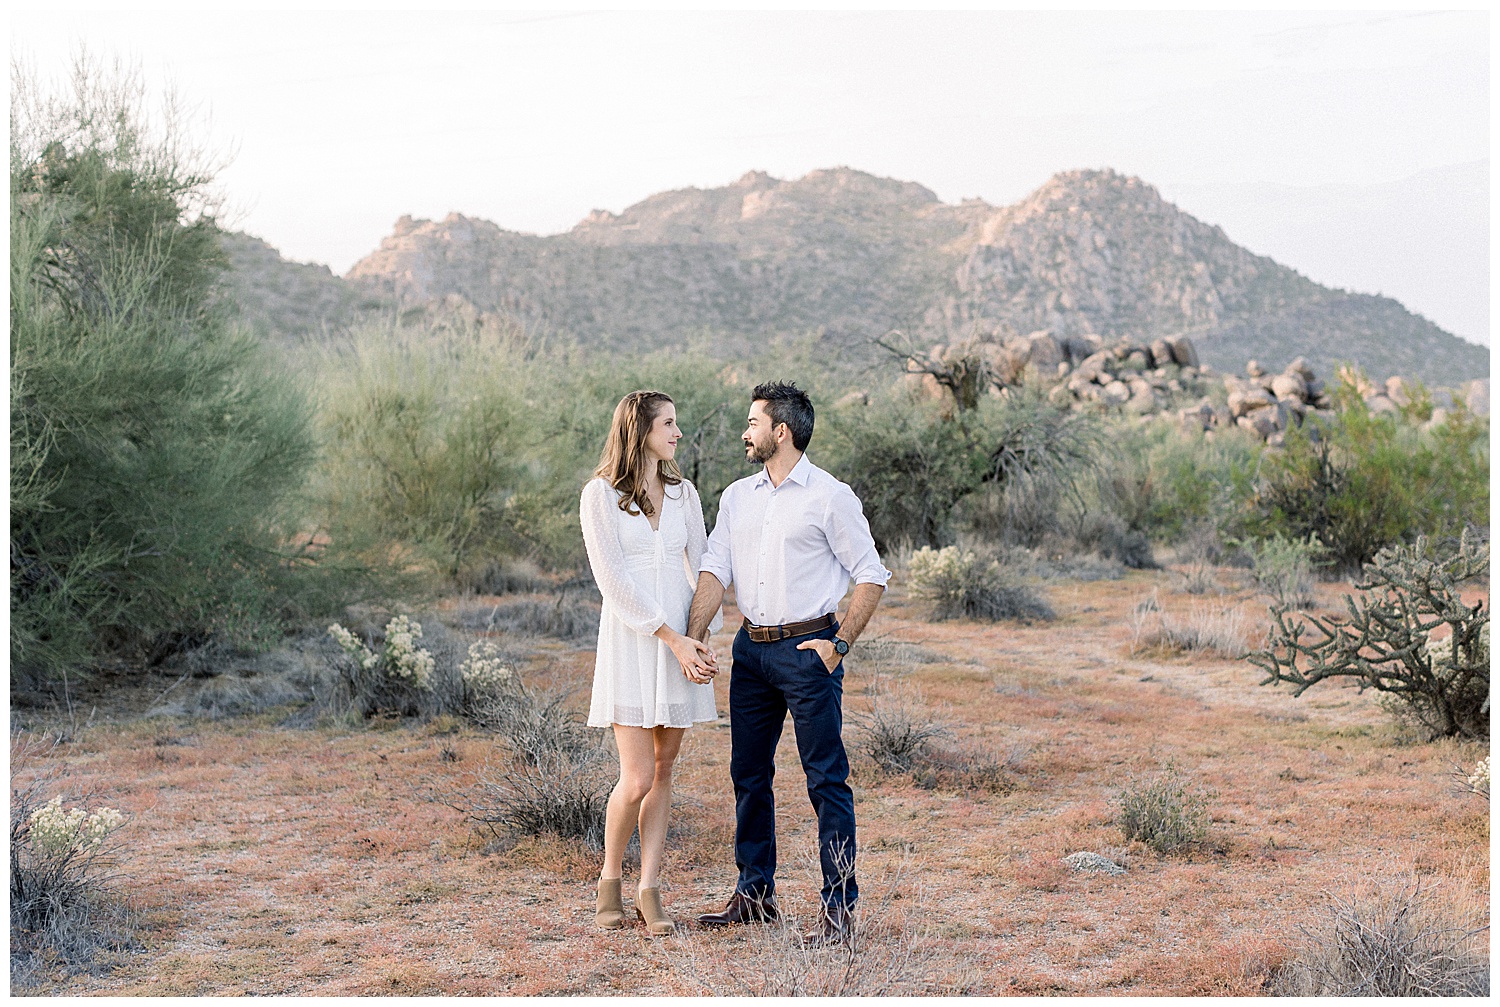 Engagement Session in the boulders of North Scottsdale Desert